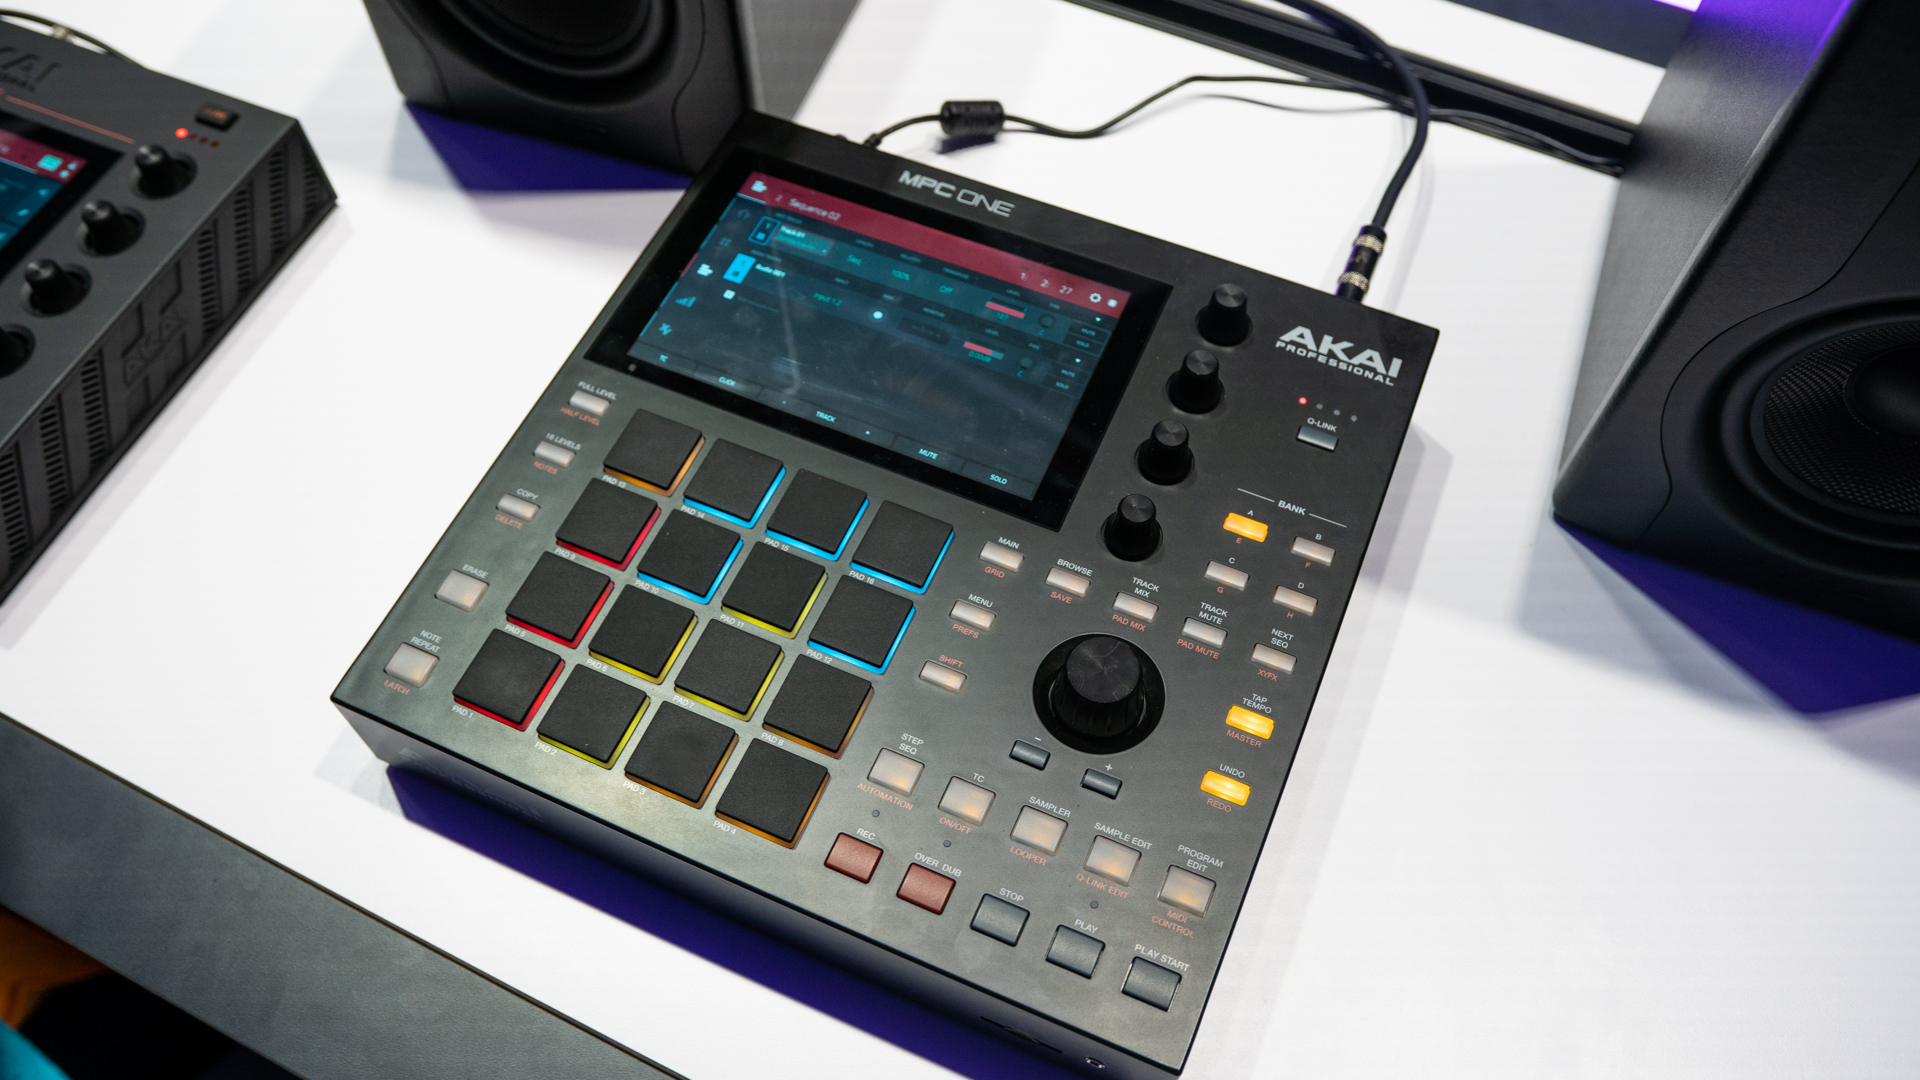 The MPC One pictured from the top with the screen on and colorful pads. 